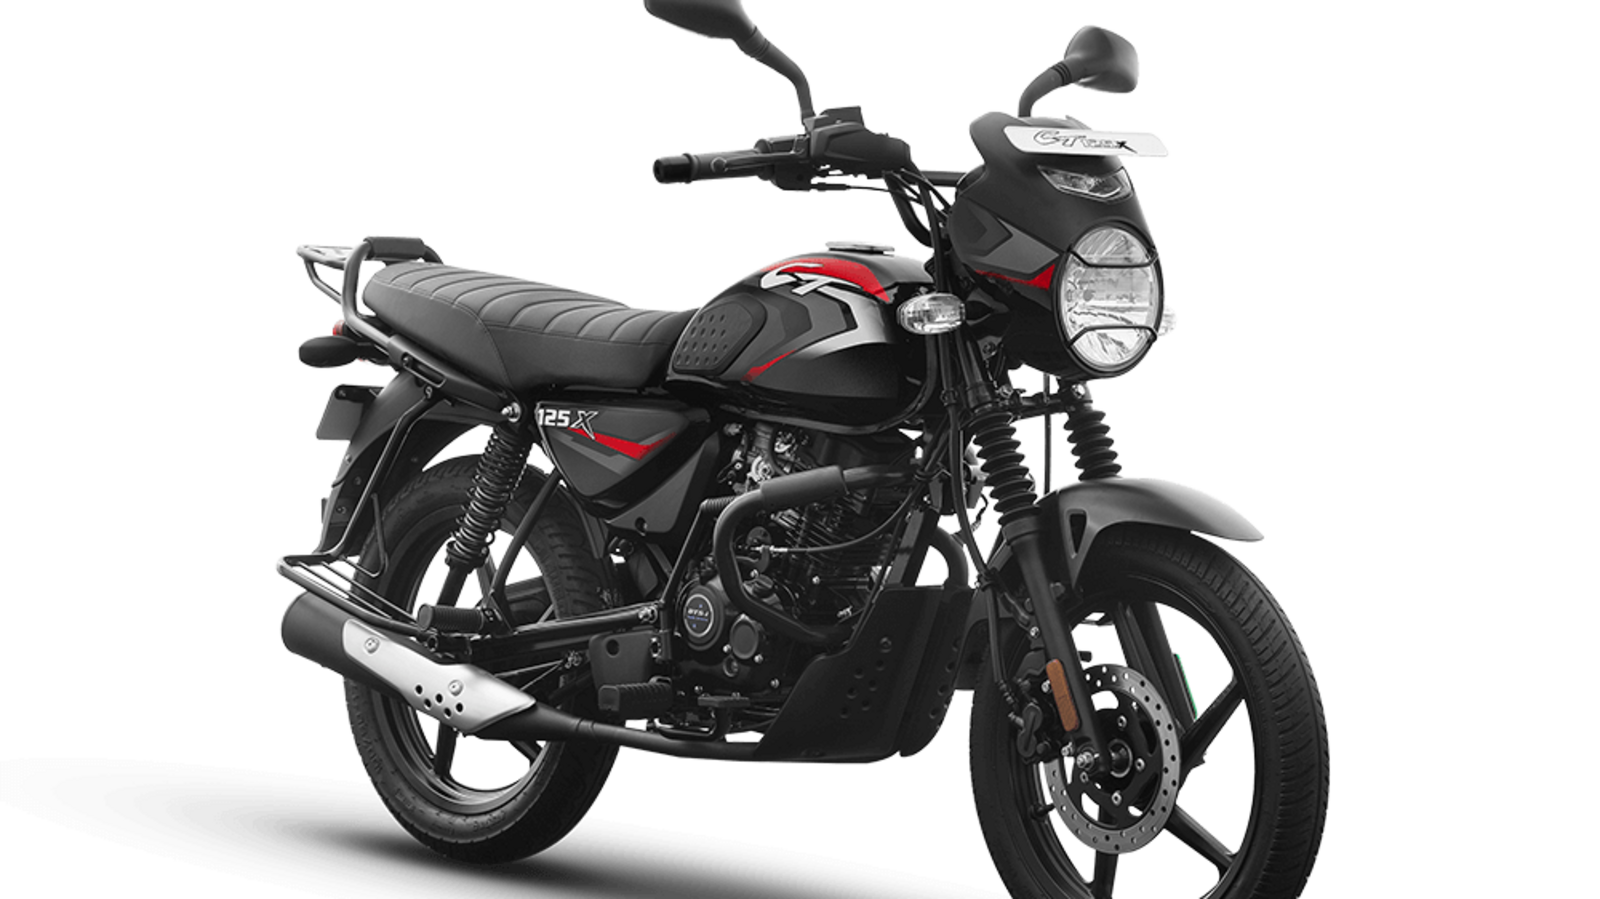 Bajaj CT X, India's mostaffordable 125cc bike, launched. Check price